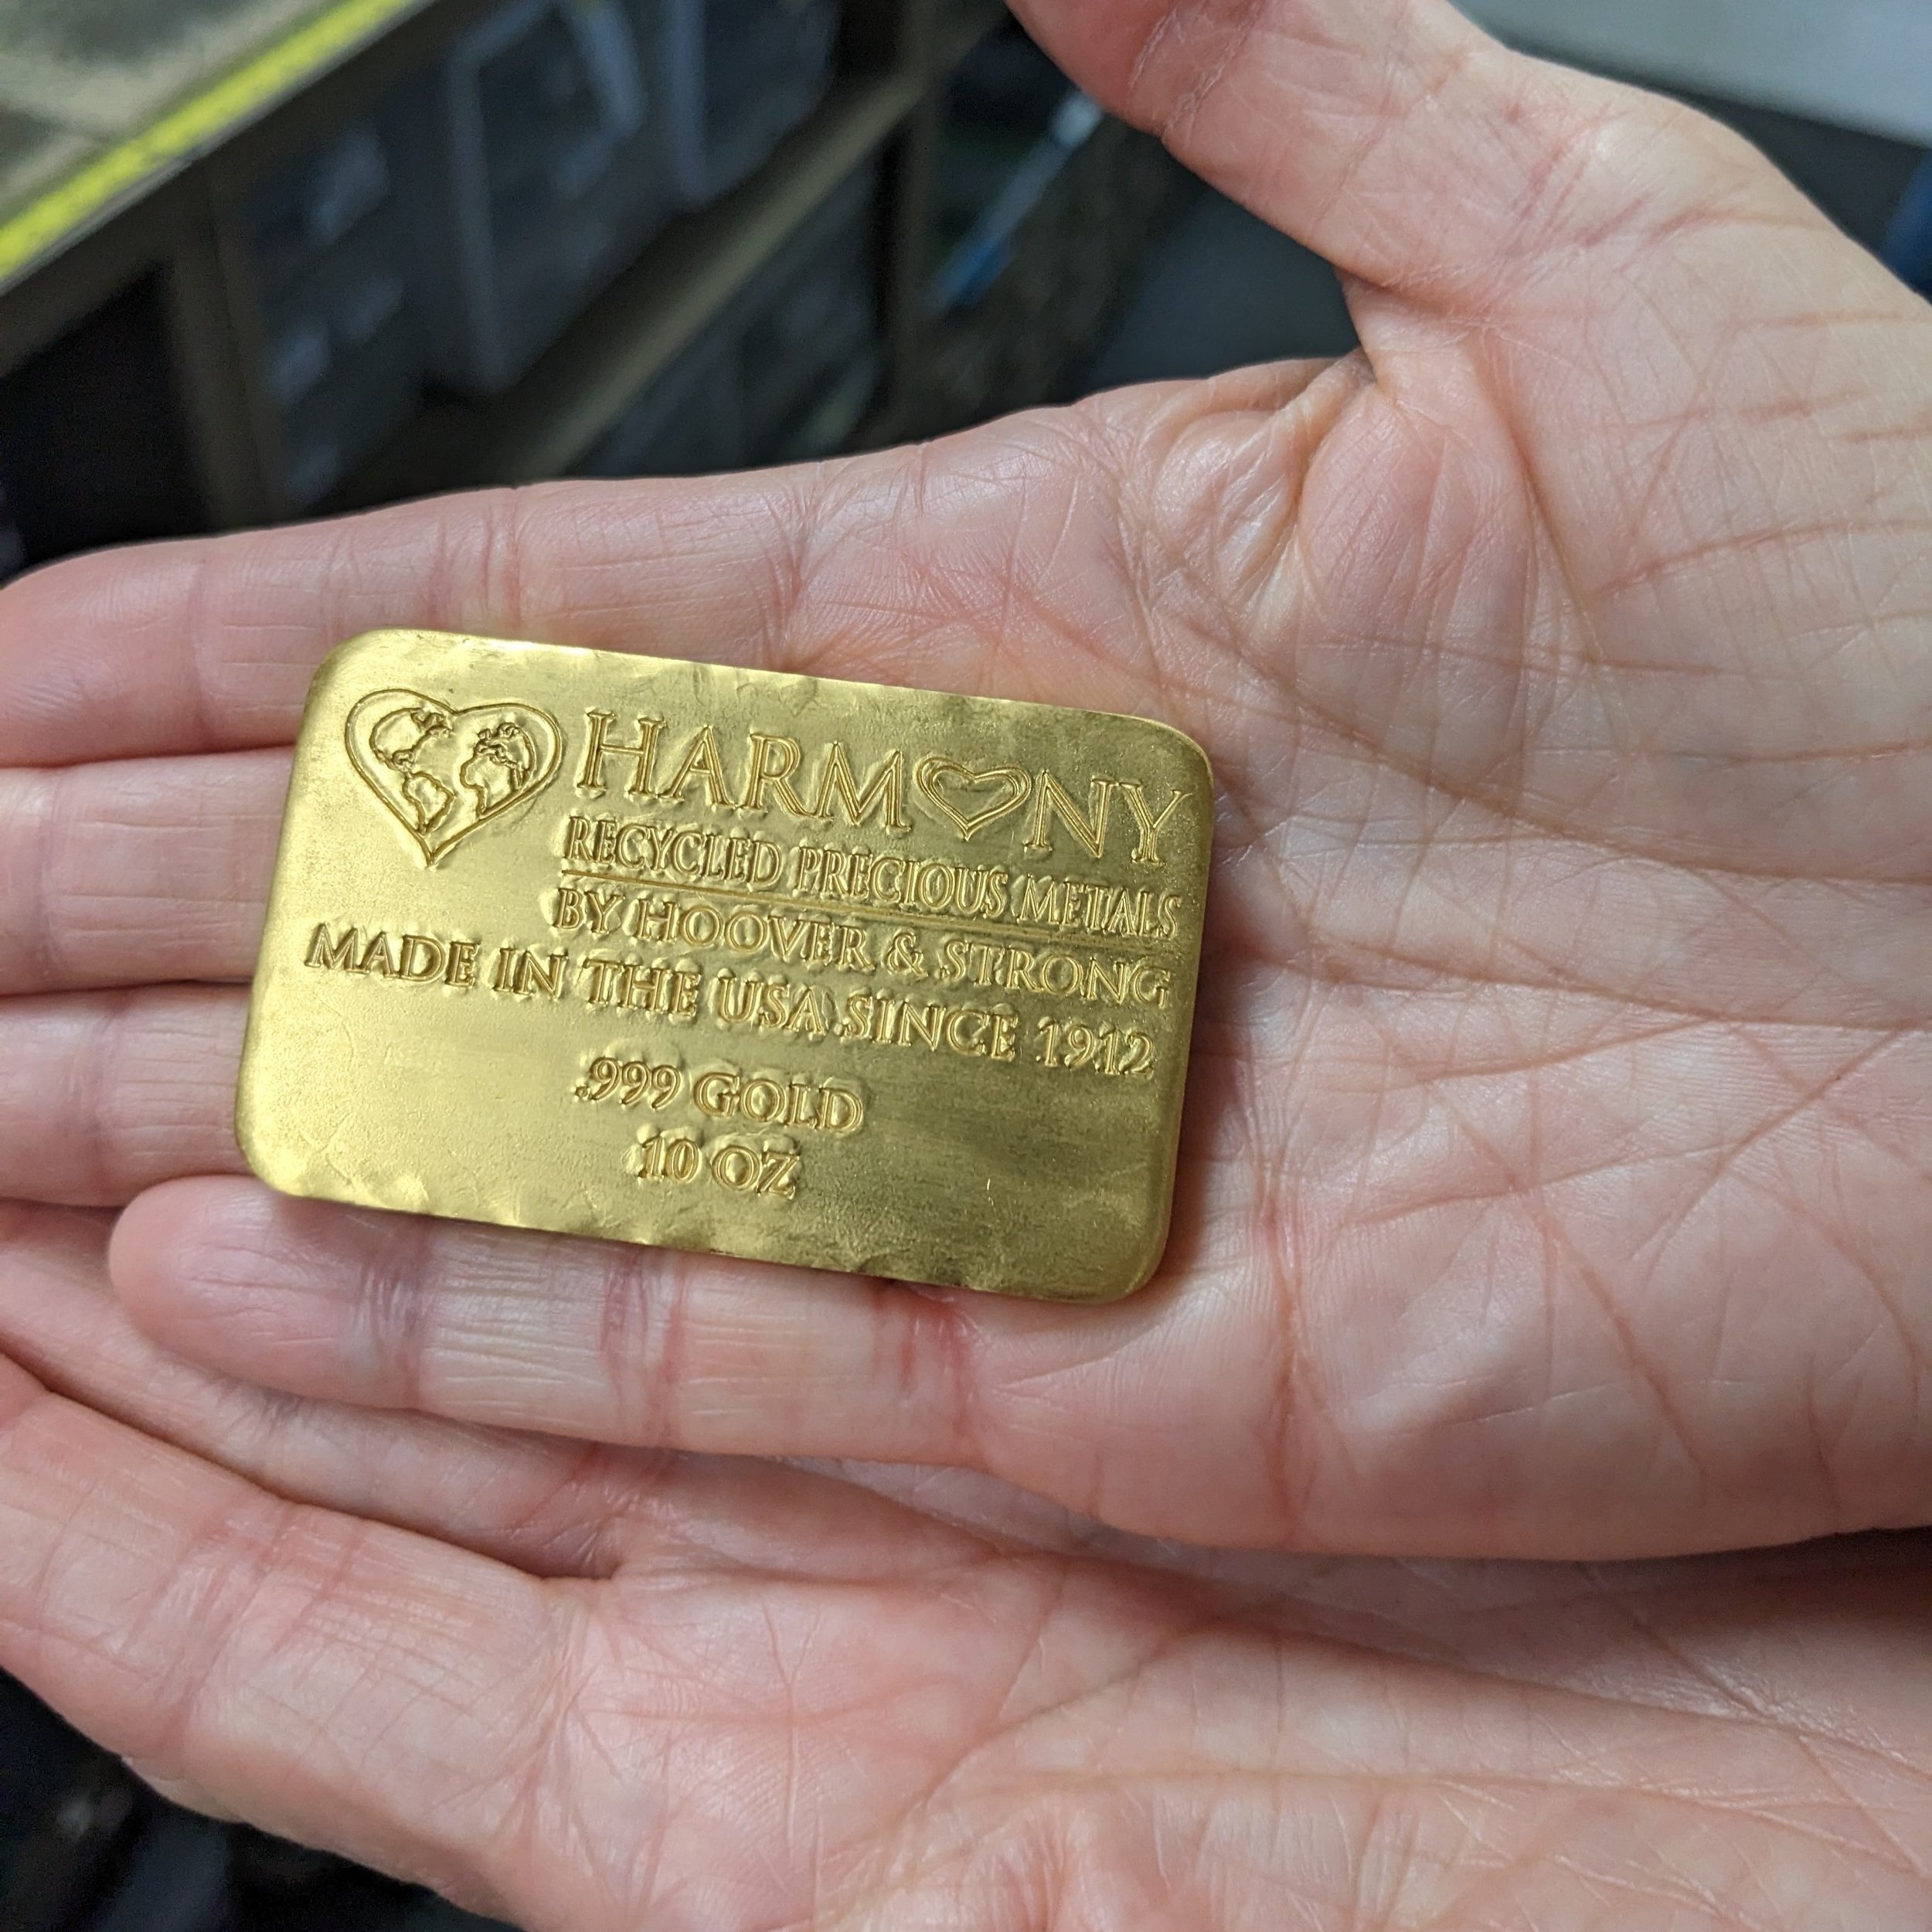  EM Members visit Hoover &amp; Strong metal refinery. Shown is an ingot of their line of Harmony gold.